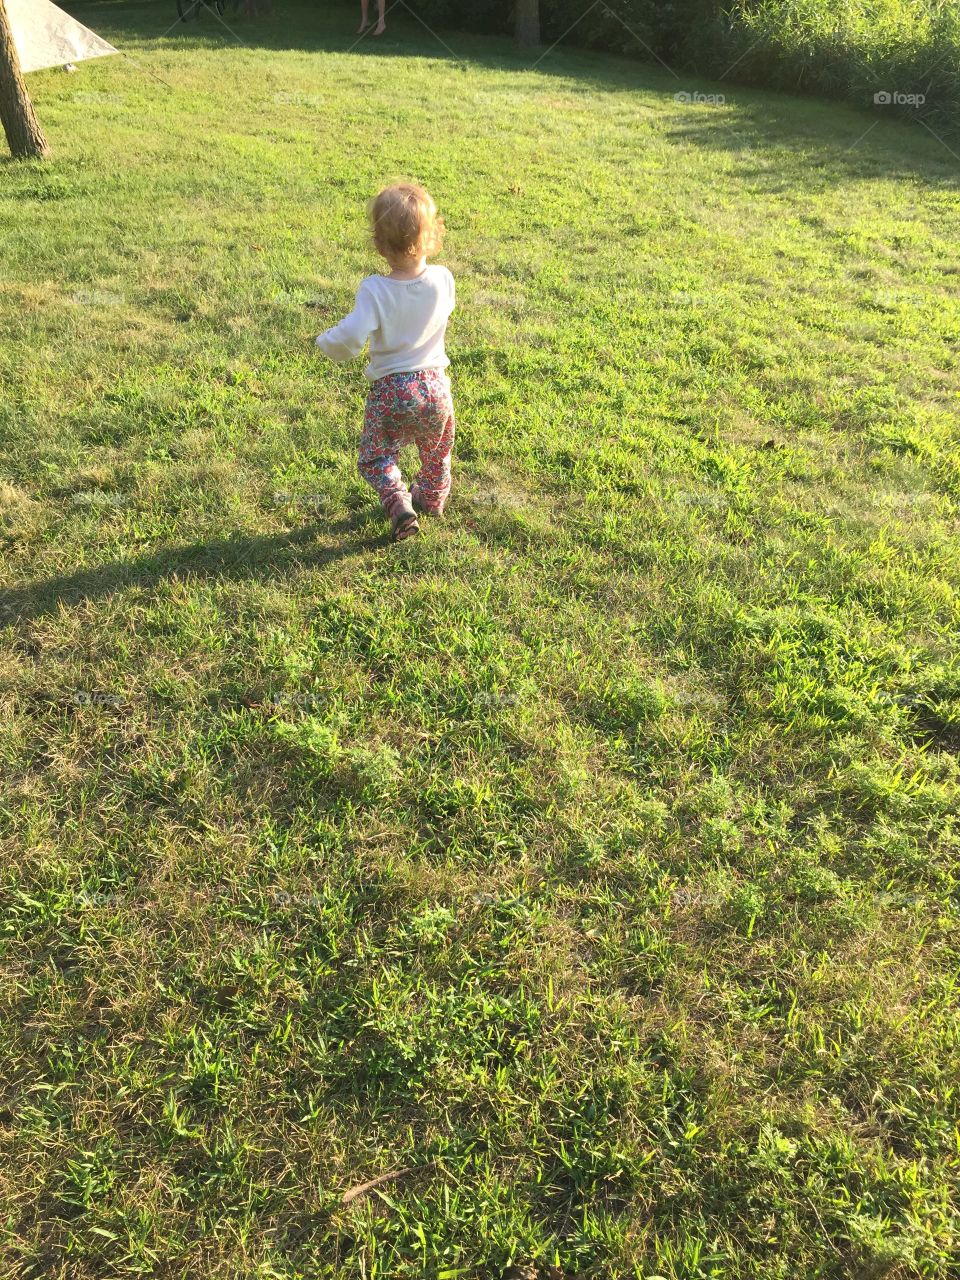 Walking in the grass.